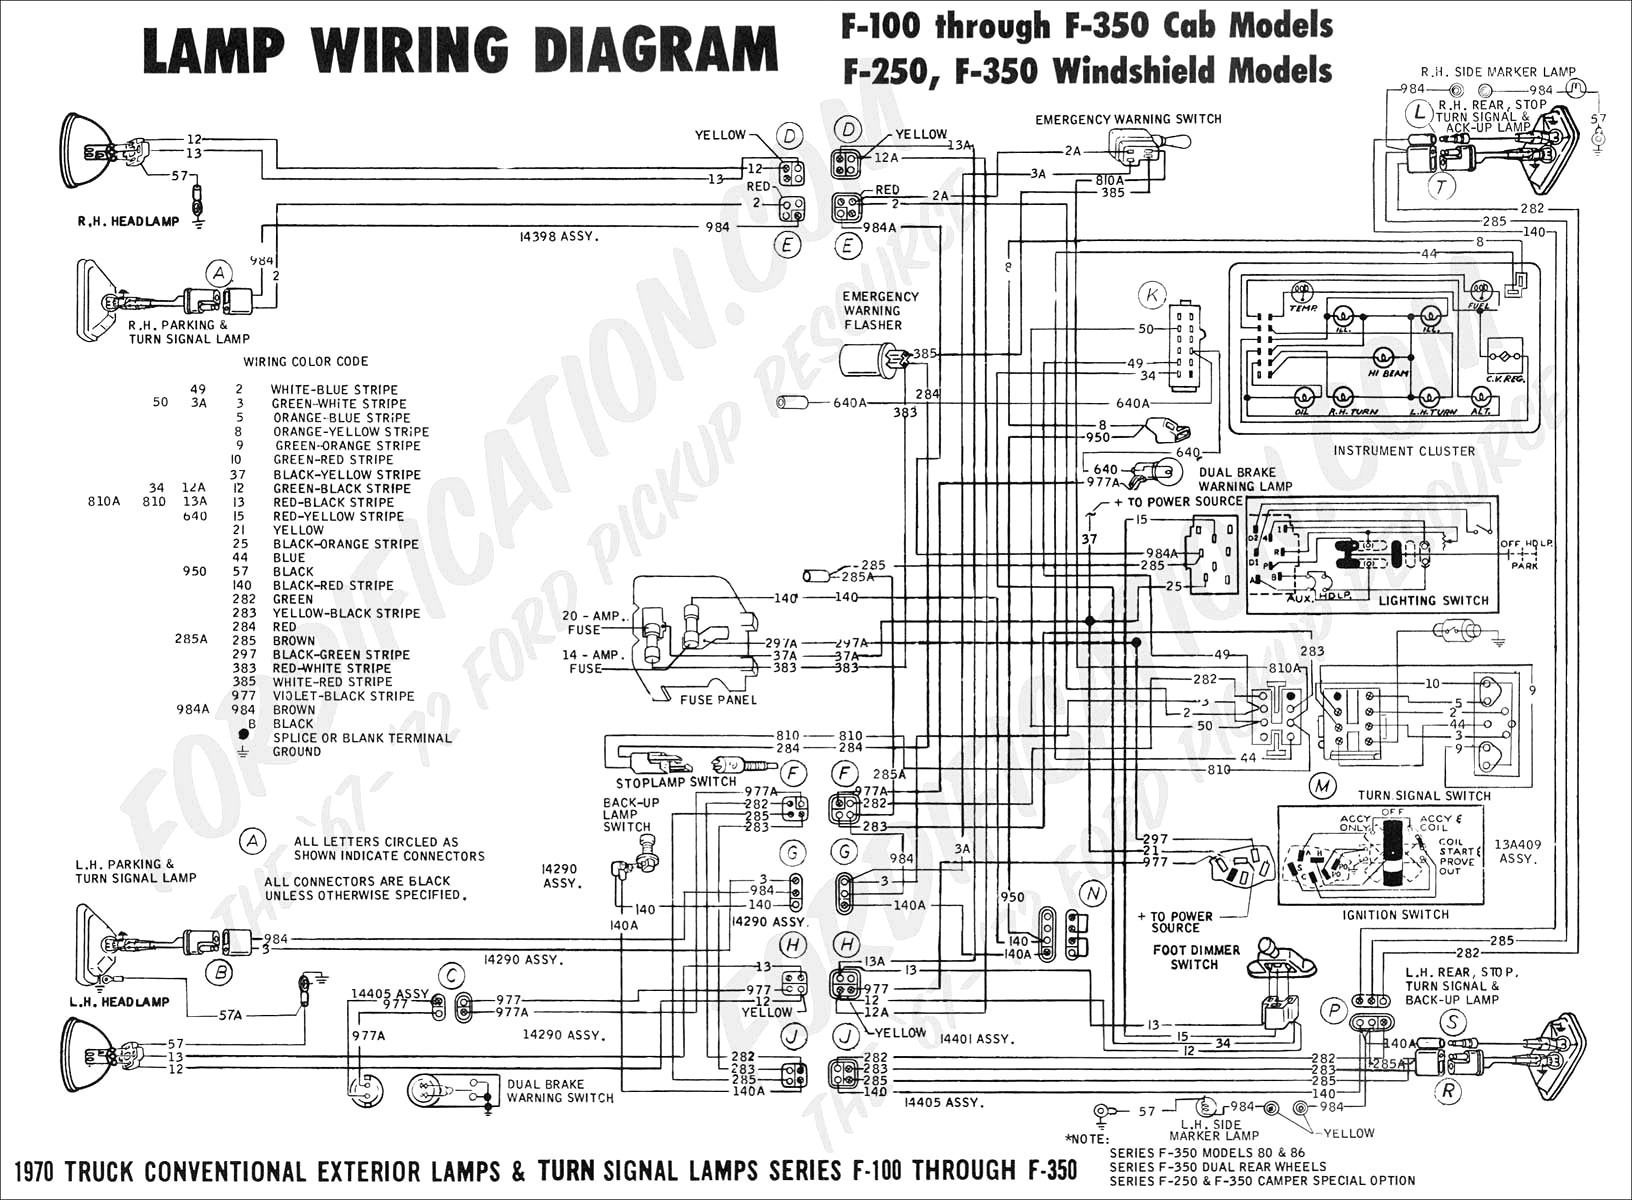 Alternator Wiring Diagram for 1967 Mustang Refrence 1937 ford Vin Number Location 1965 Mustang Wiring Diagram